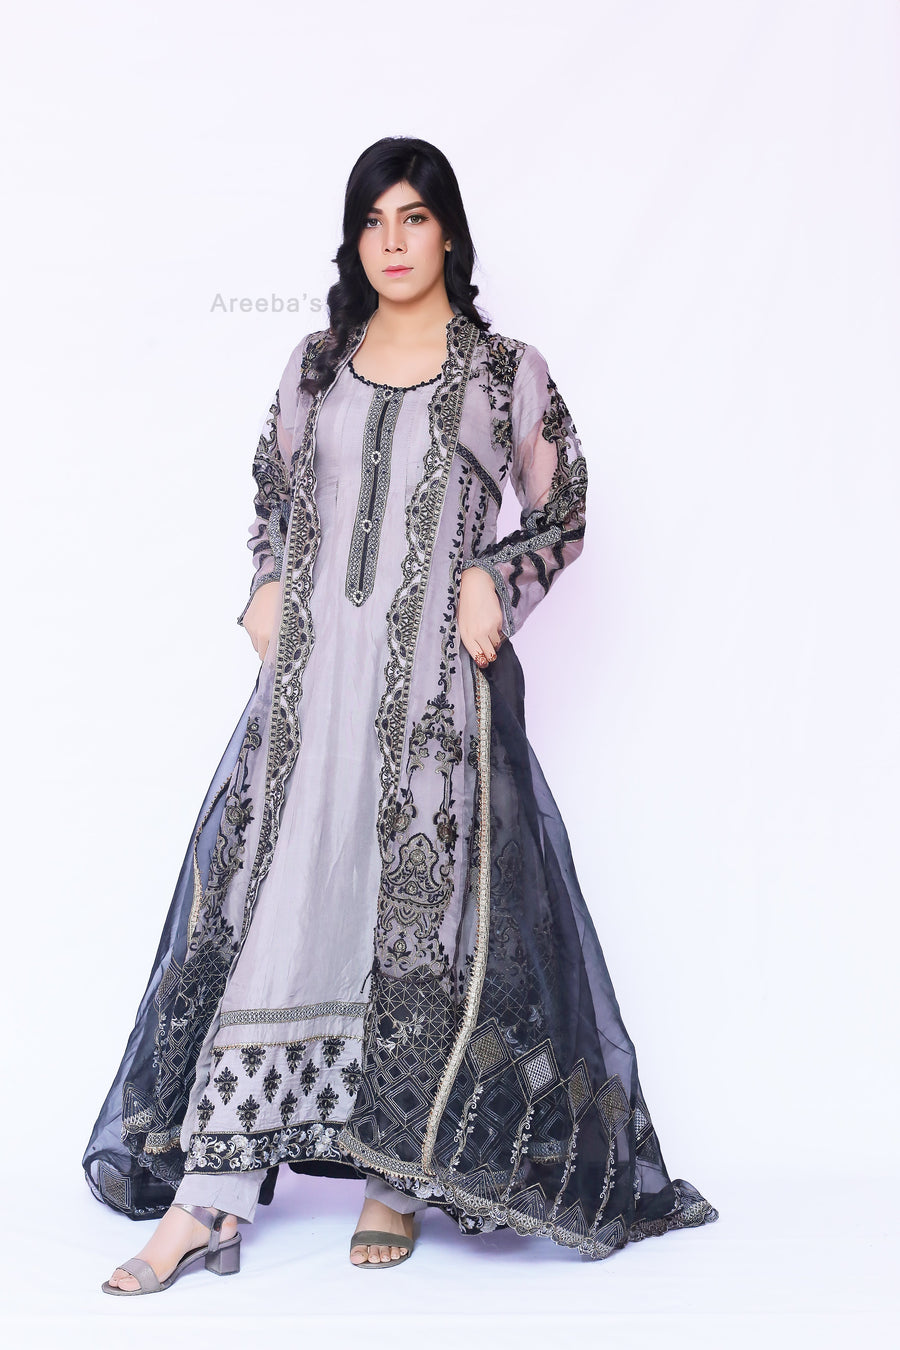 Nadia K Party suit S5- Areeba's Couture